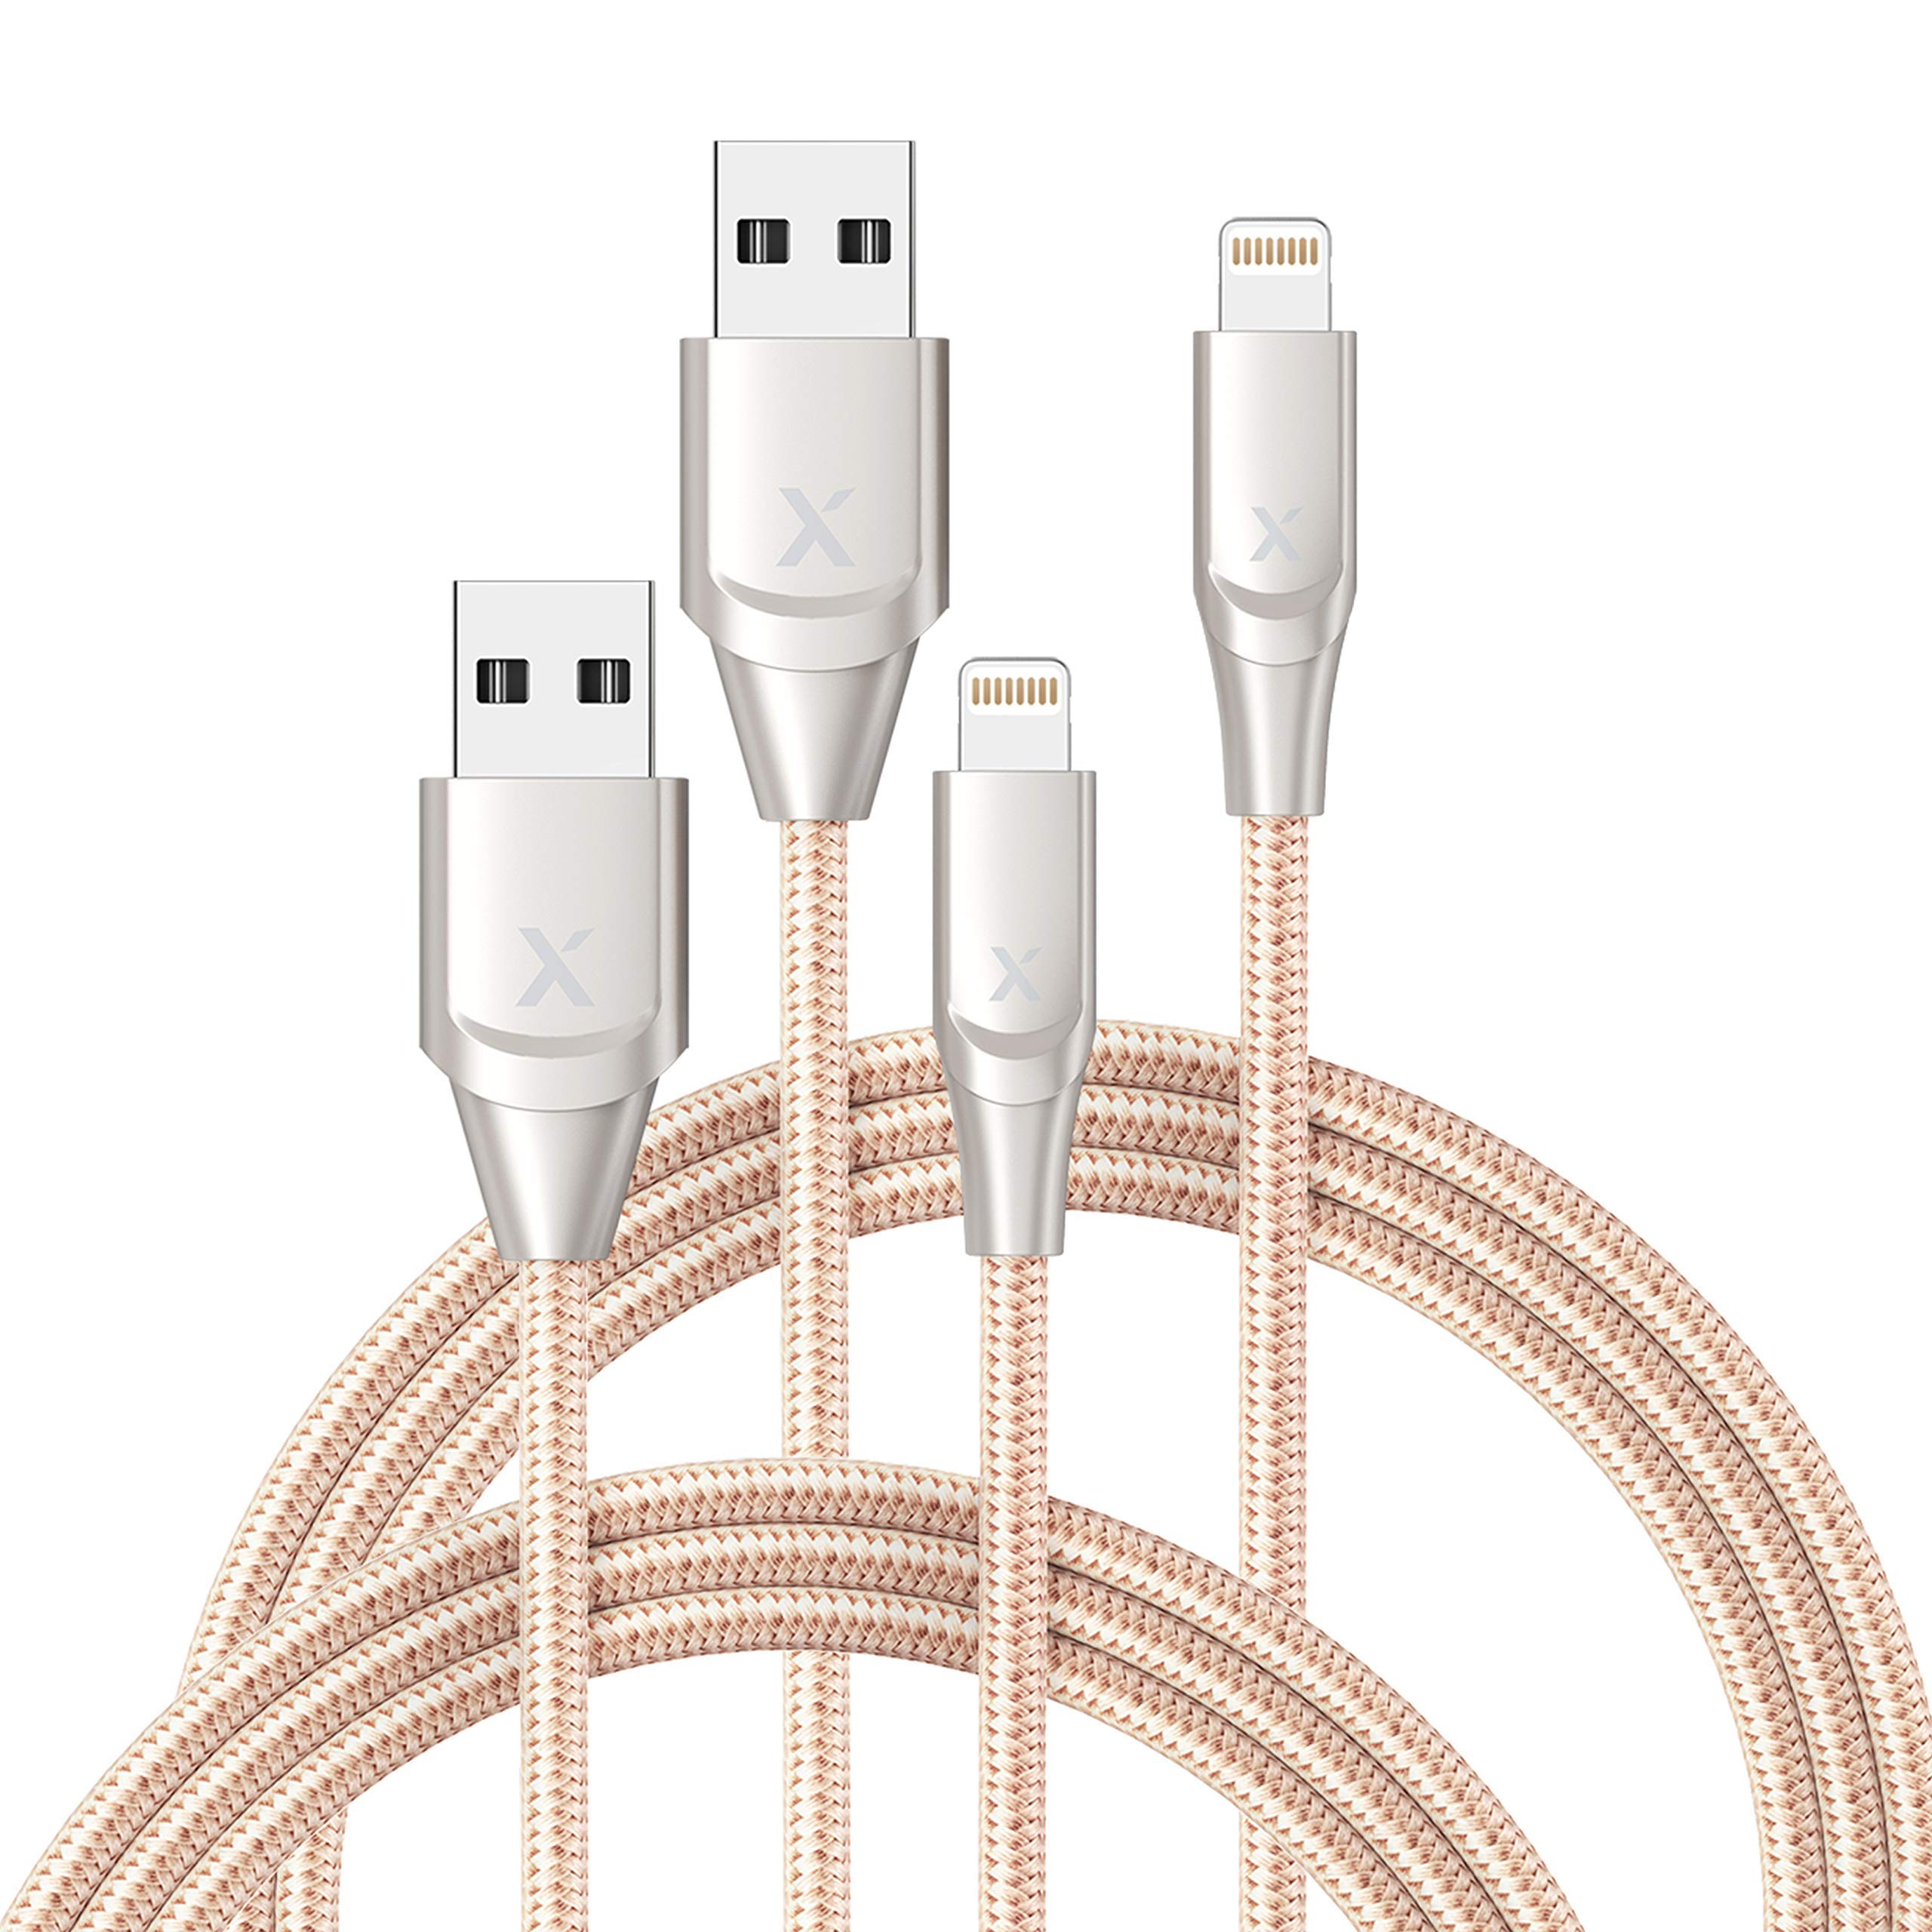 Book Cover iPhone Charger Xcentz 3ft 2 Pack, MFi Certified Lightning Cable, High-Speed iPhone Charger Cable Durable Braided Charging Cord for iPhone 11/X/XS/XR/XS Max/8/7/7 Plus/6/5s, iPad Mini/Air, Gold